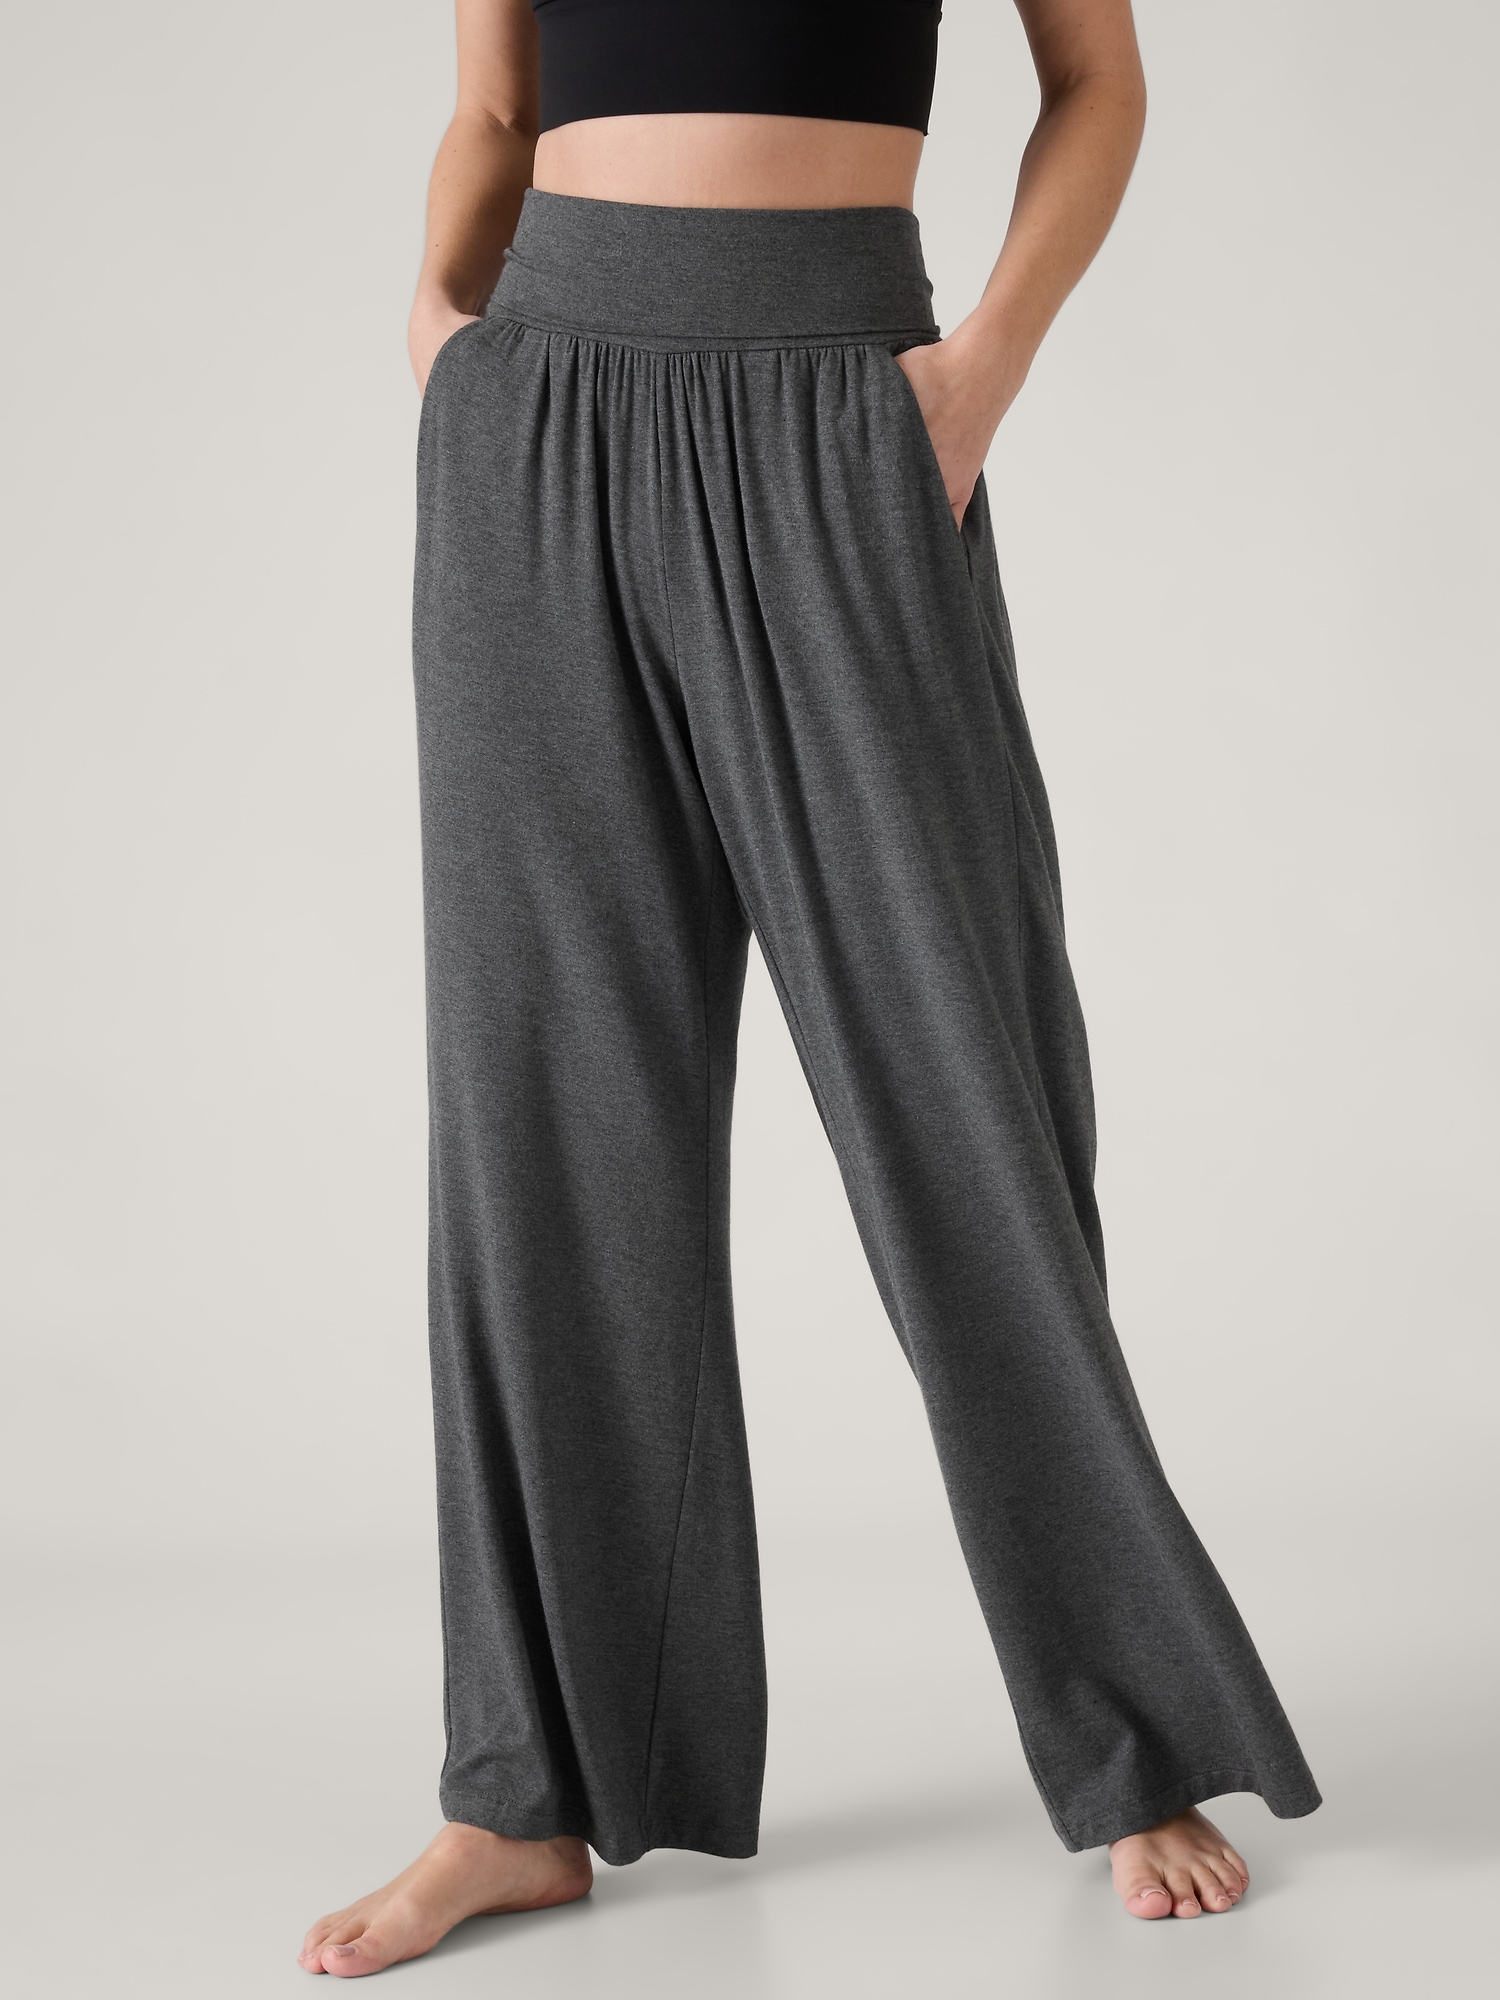 Enza® 165T79 Ladies Fold Over Yoga Pant - Tall - Wholesale Apparel